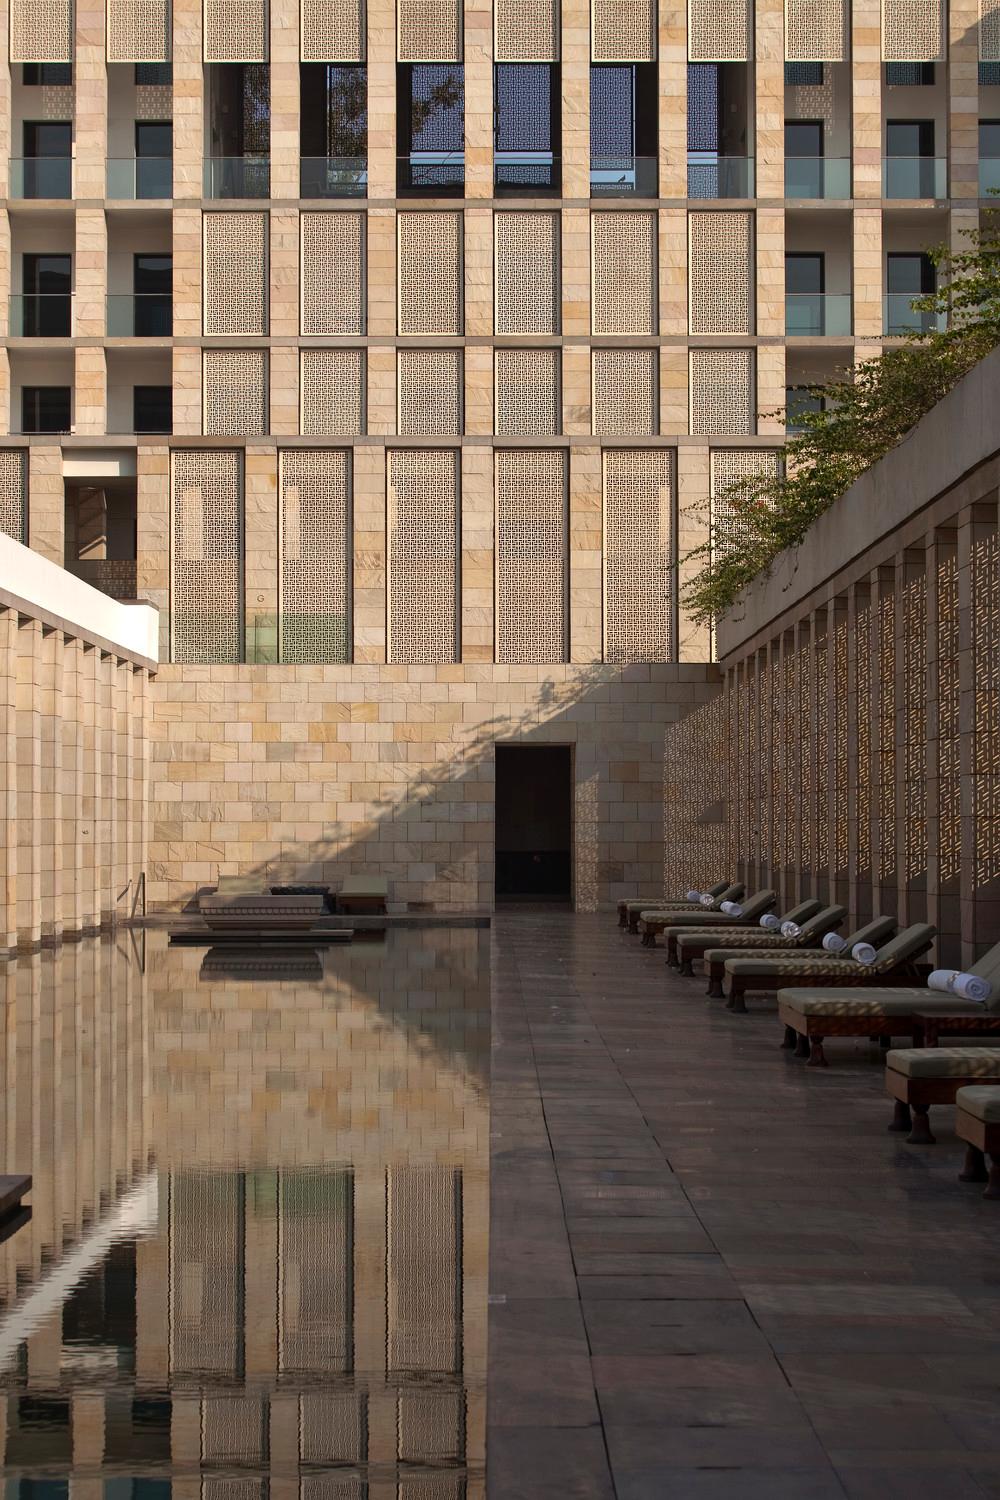 The hotel swimming pool is located in a sunken courtyard and forms the centre of the spa and health facilities.